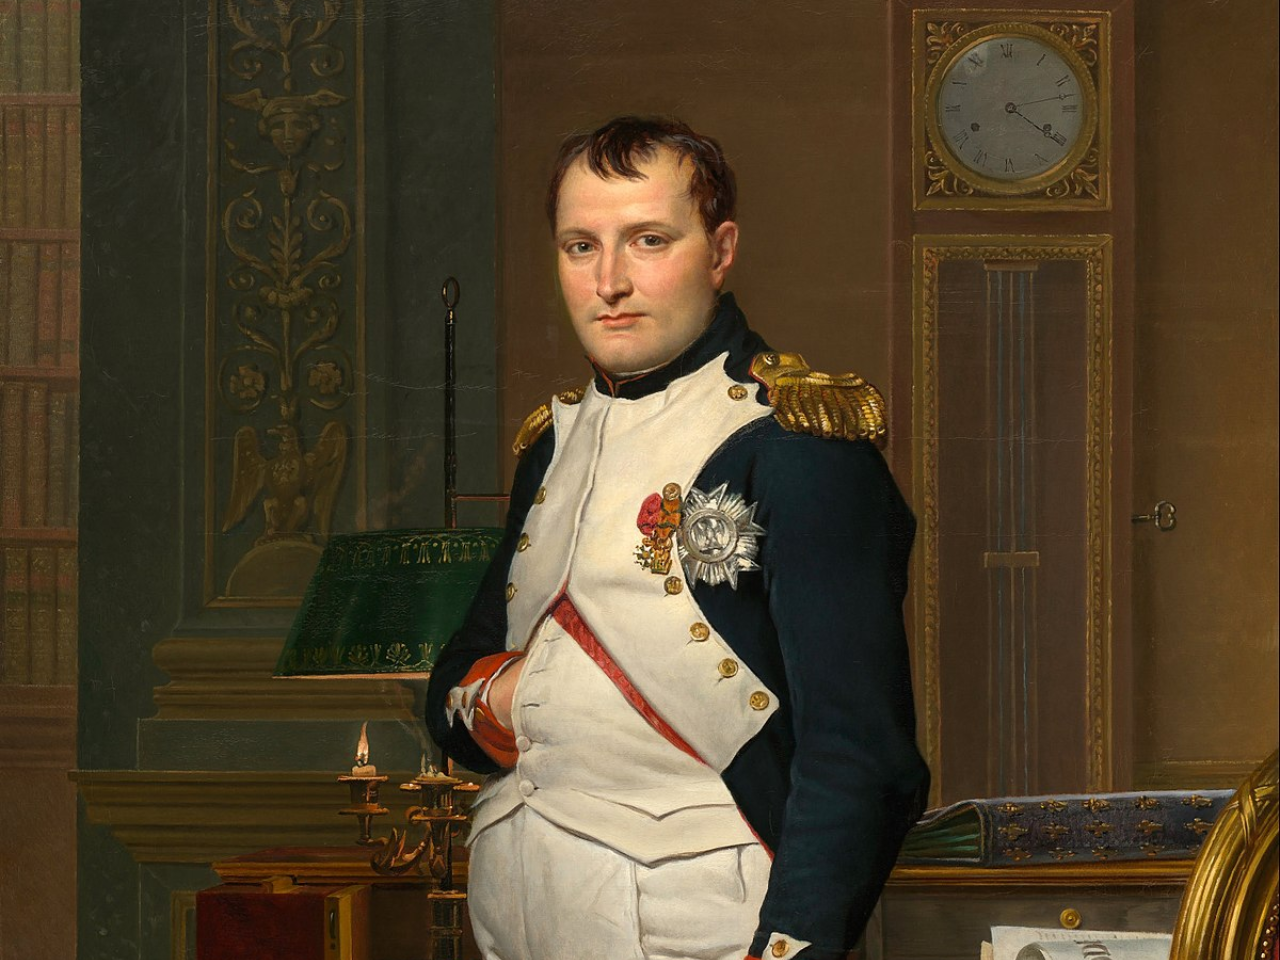 A painting portrait of Napoleon, in his signature pose - one hand in pocket.